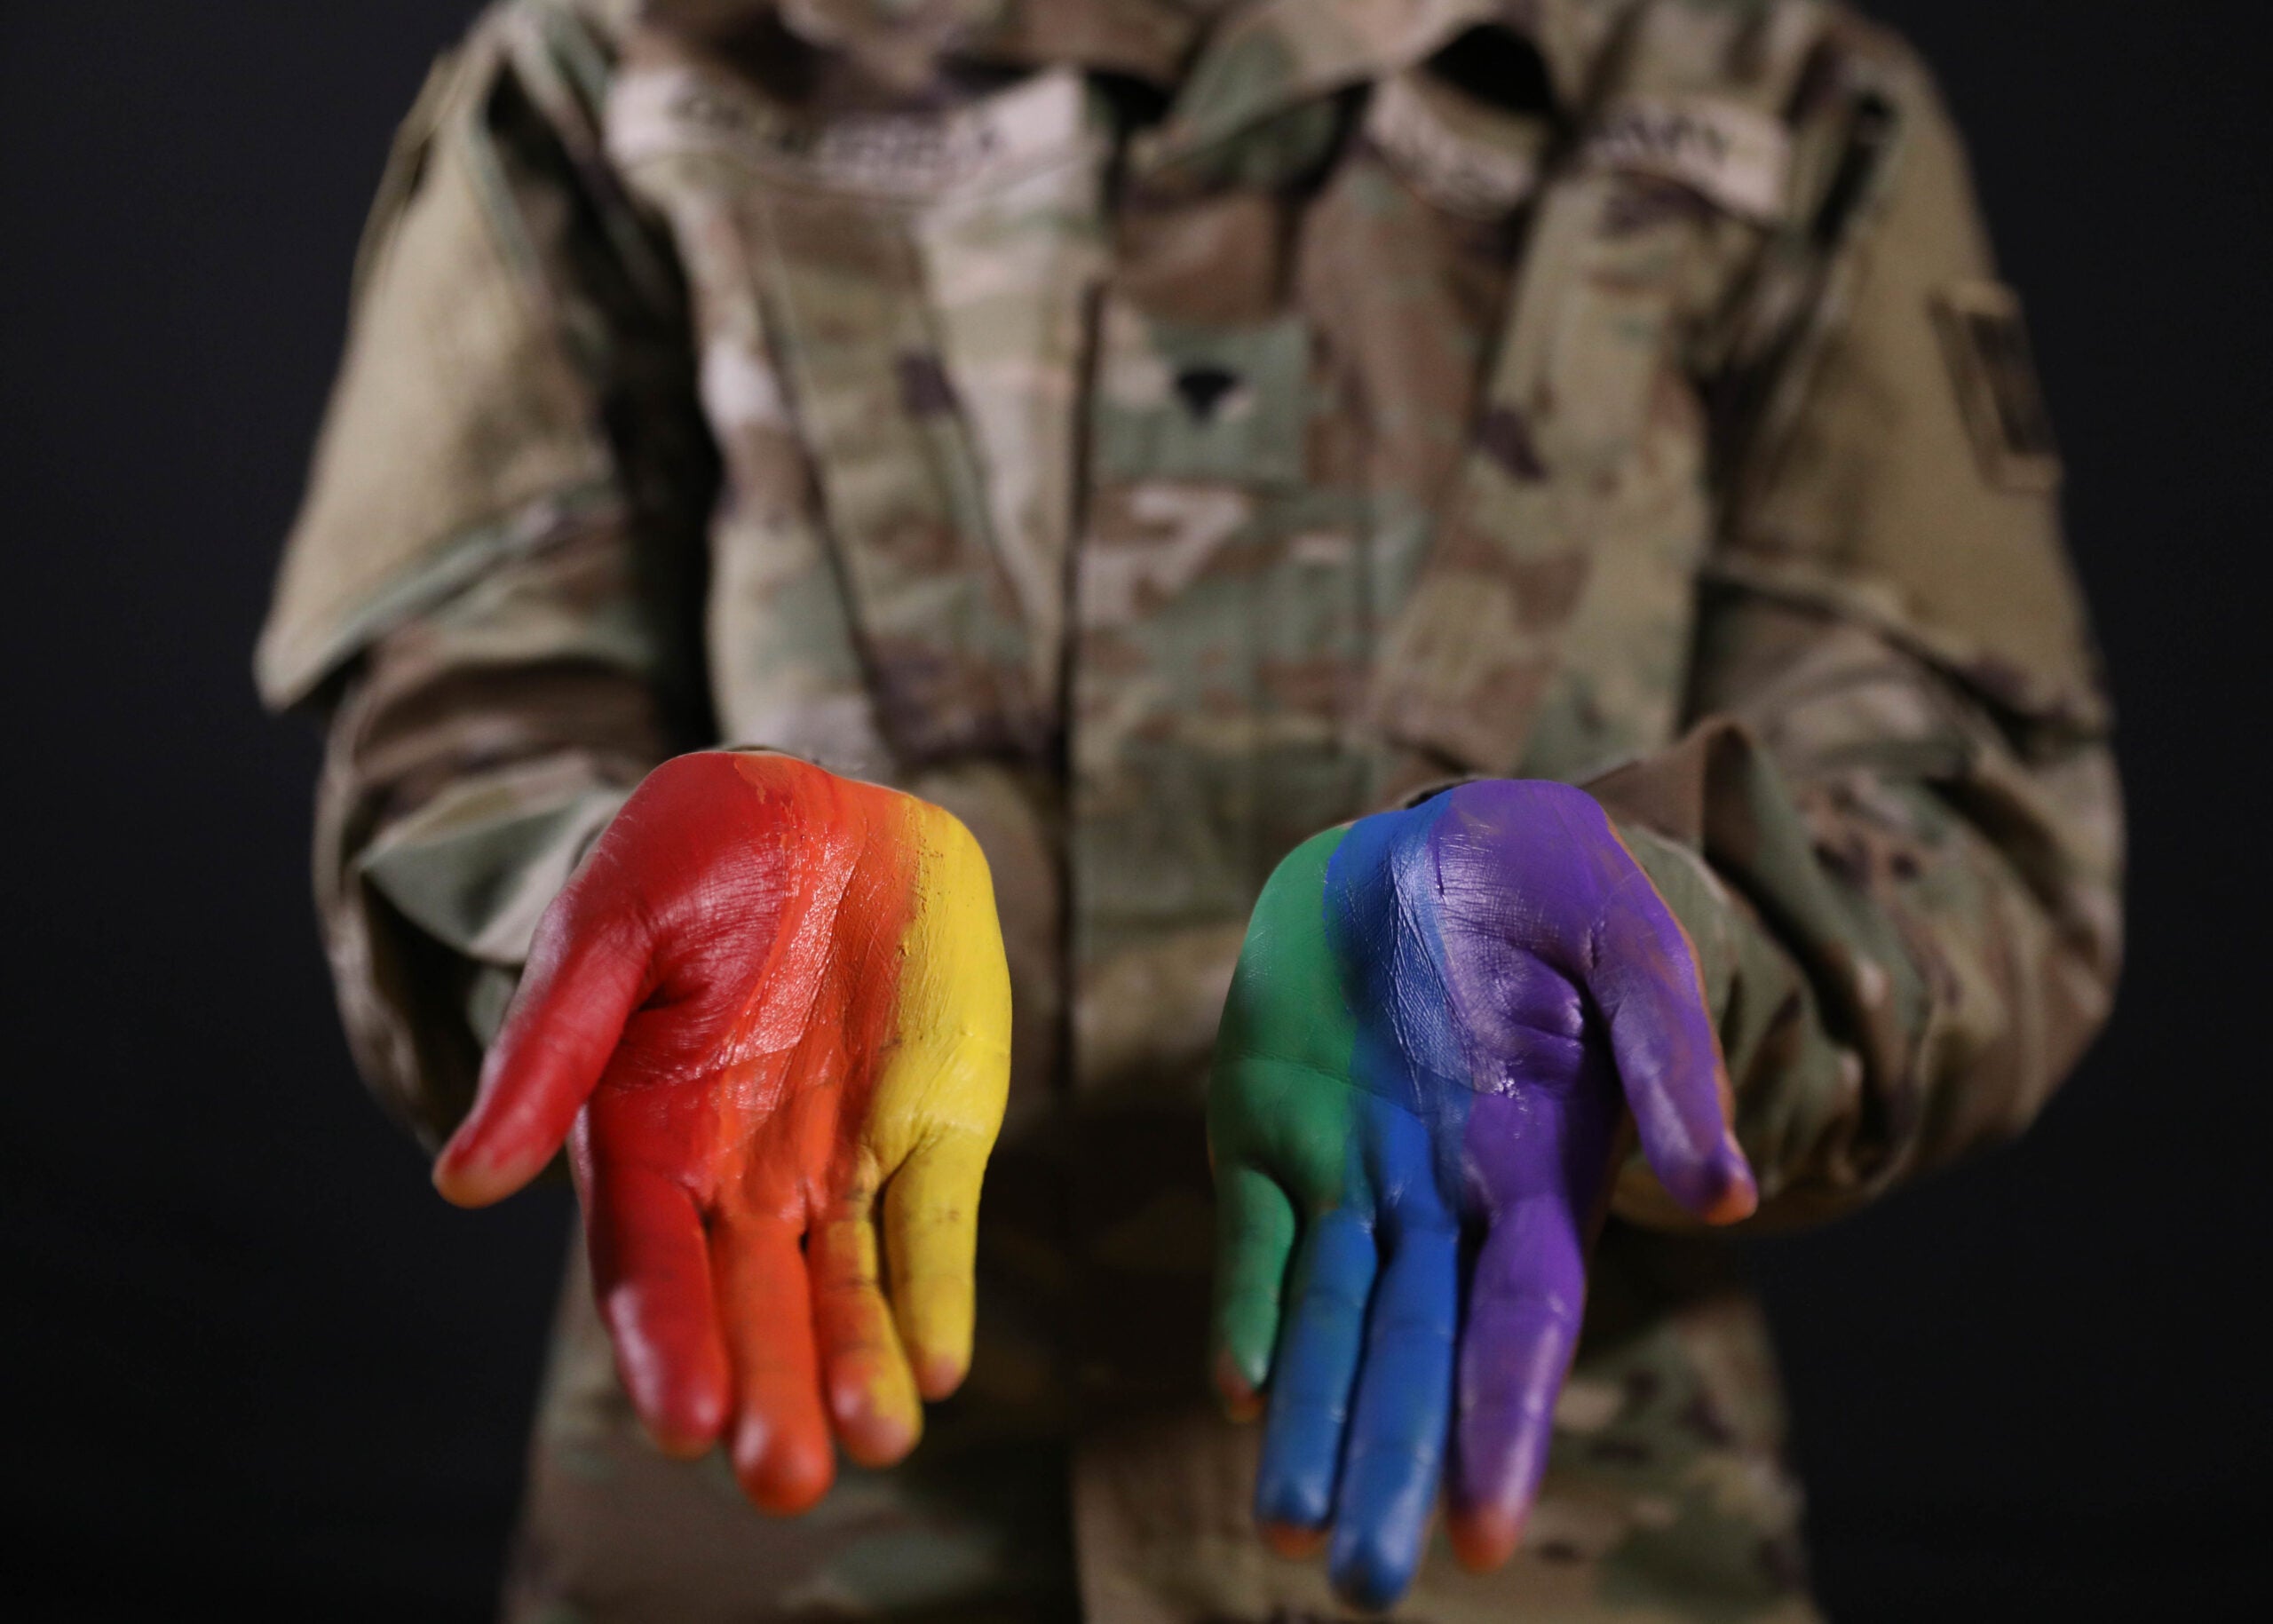 Spc. Sevyn Guerra, a Human Resources Specialist, assigned to Headquarters and Headquarters Battalion, 4th Infantry Division, captured for a Pride Month photo shoot on June 22, 2021 at Fort Carson, Colorado. Guerra poses with her hands painted as the colors of the Pride flag to celebrate Pride Month. (U.S. Army photo by Pfc. Collin MacKown)